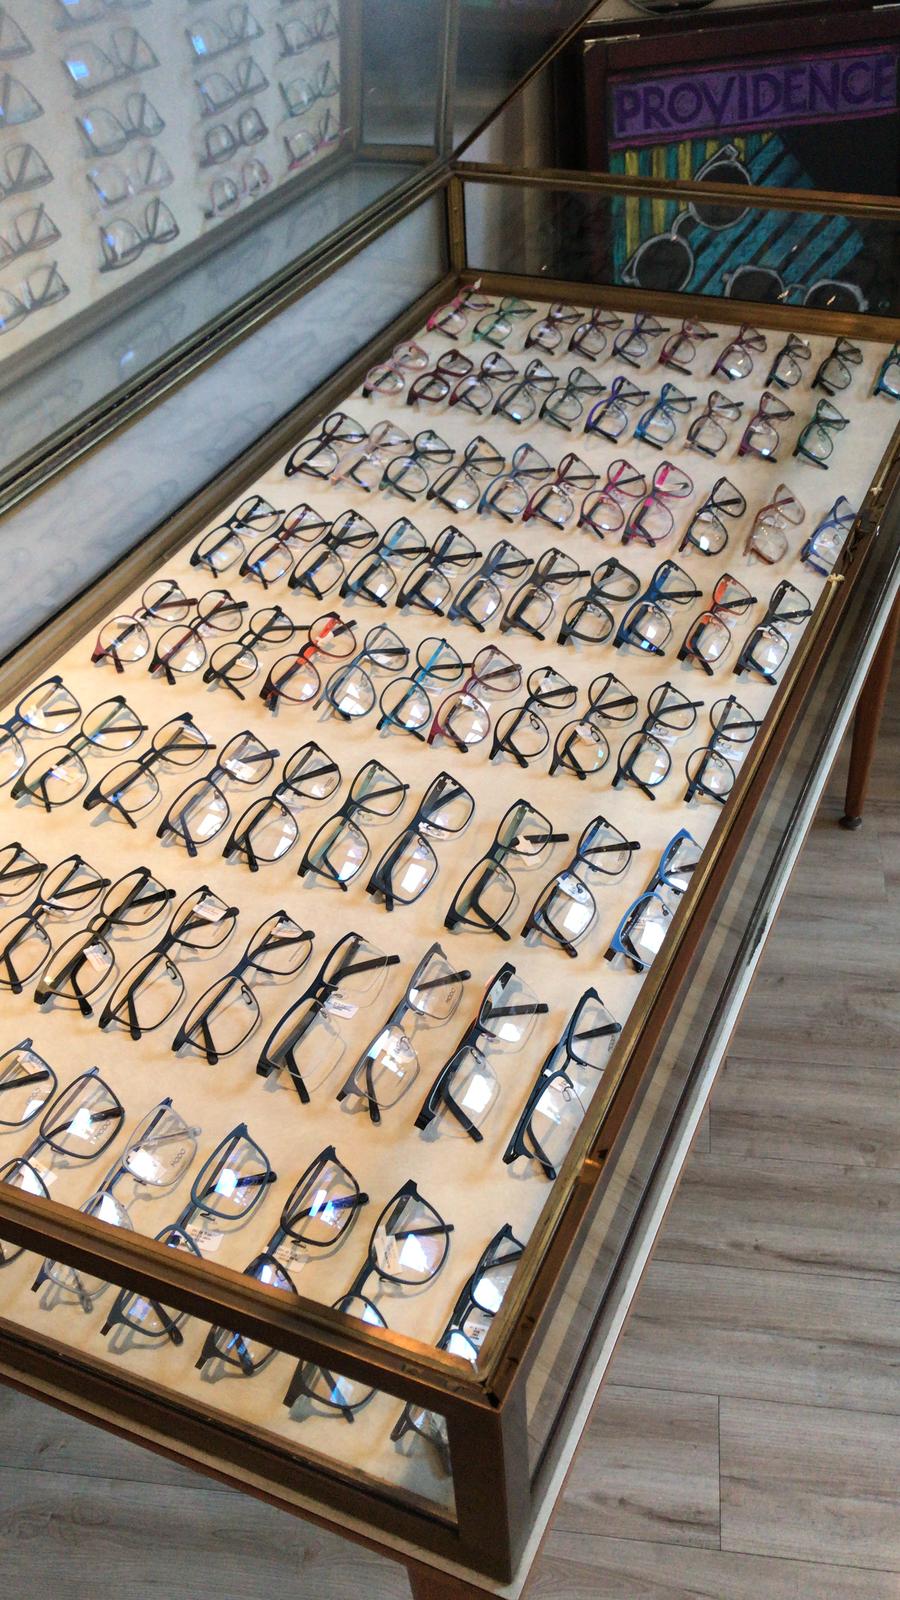 2019 Blackfin collection at Providence Optical